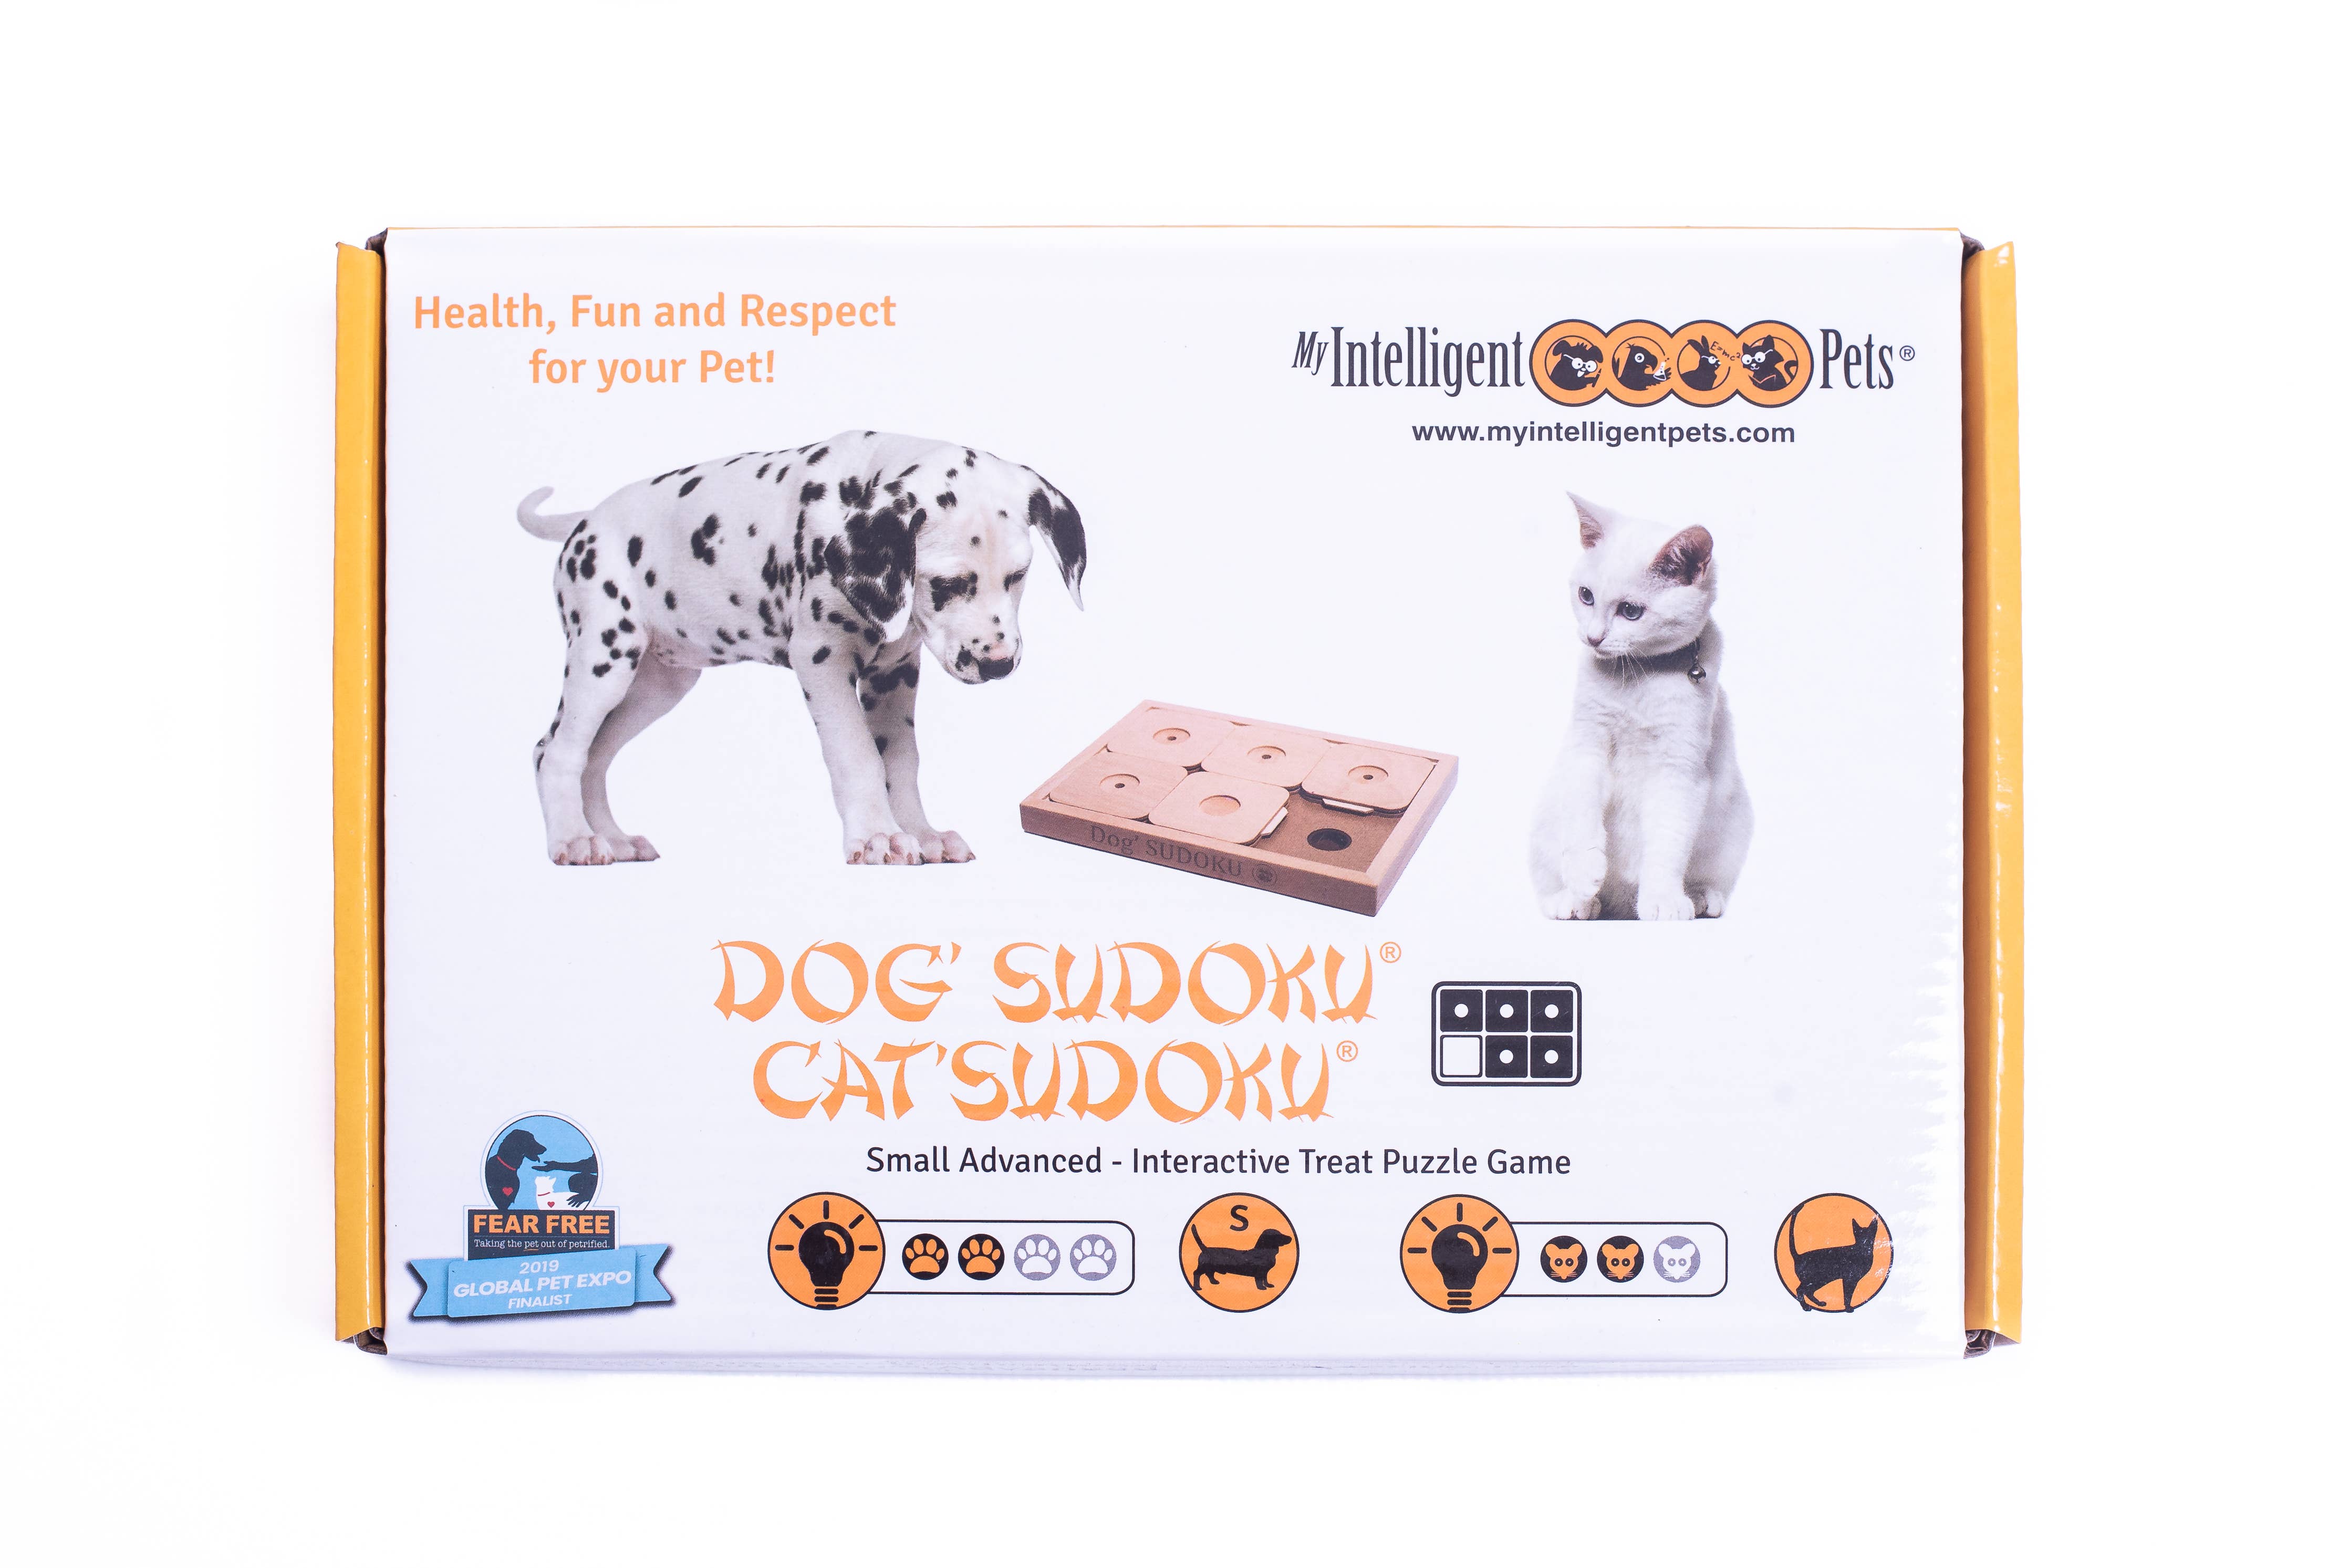 My Intelligent Pets - Pet' SUDOKU Small Advanced - puzzle for dogs and cats